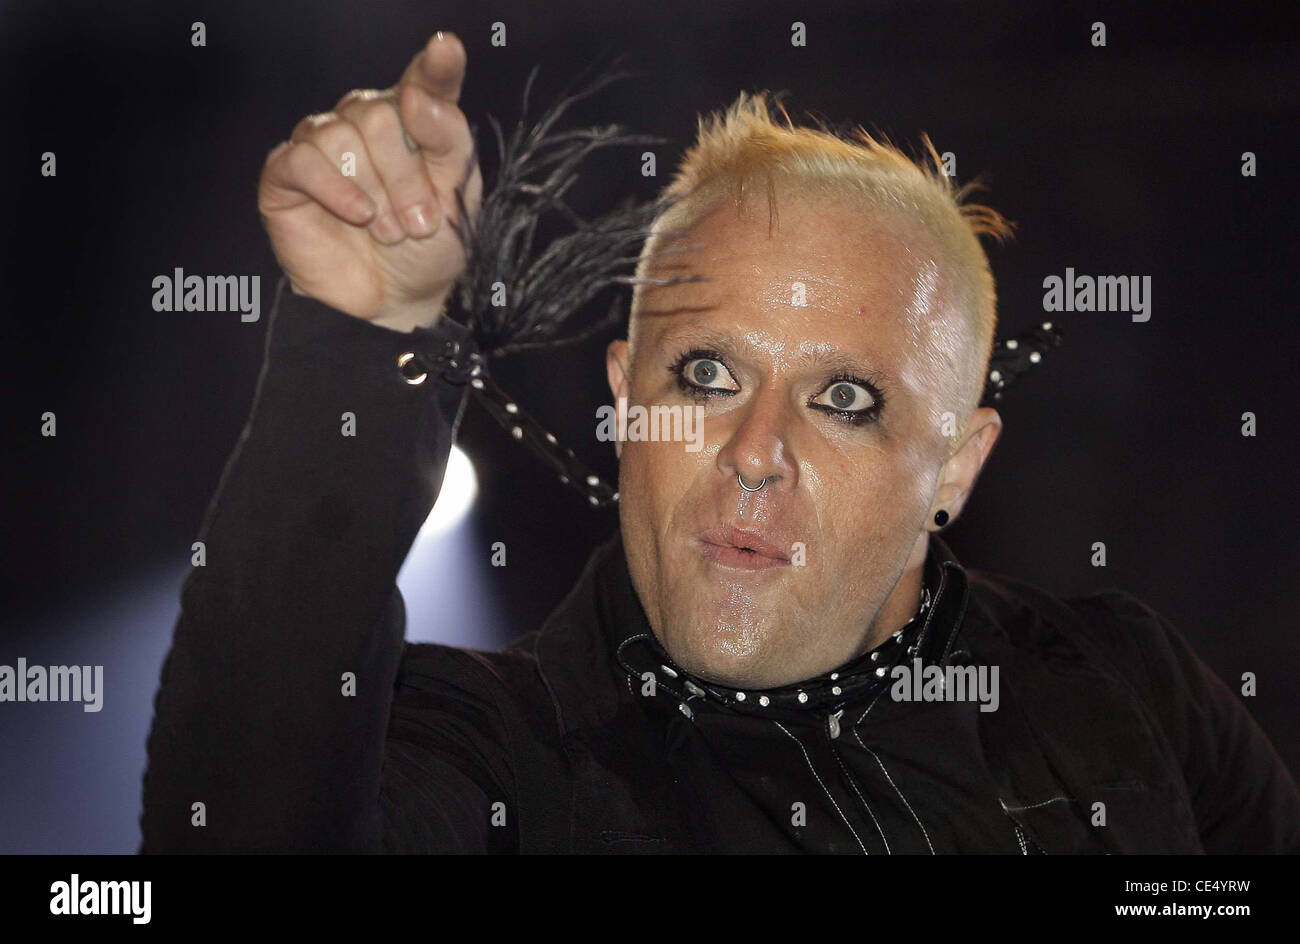 <b>Keith Flint</b> of the The Prodigy performs at the Isle of Wight Festival 2006. - keith-flint-of-the-the-prodigy-performs-at-the-isle-of-wight-festival-CE4YRW